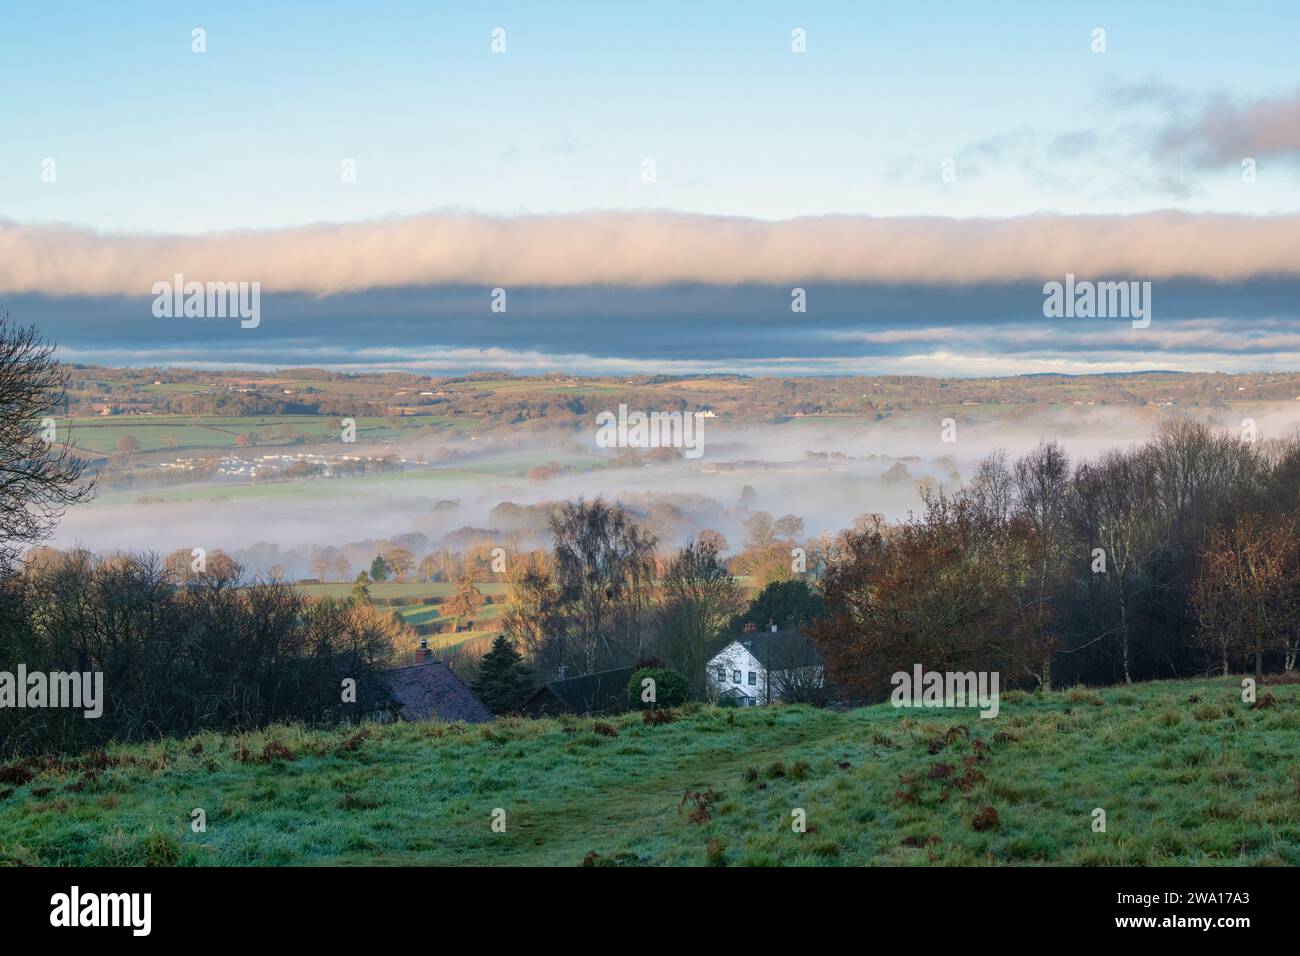 Looking over Bromyard from Bromyard Downs in the morning mist and sunlight. Bromyard, Herefordshire, England Stock Photo